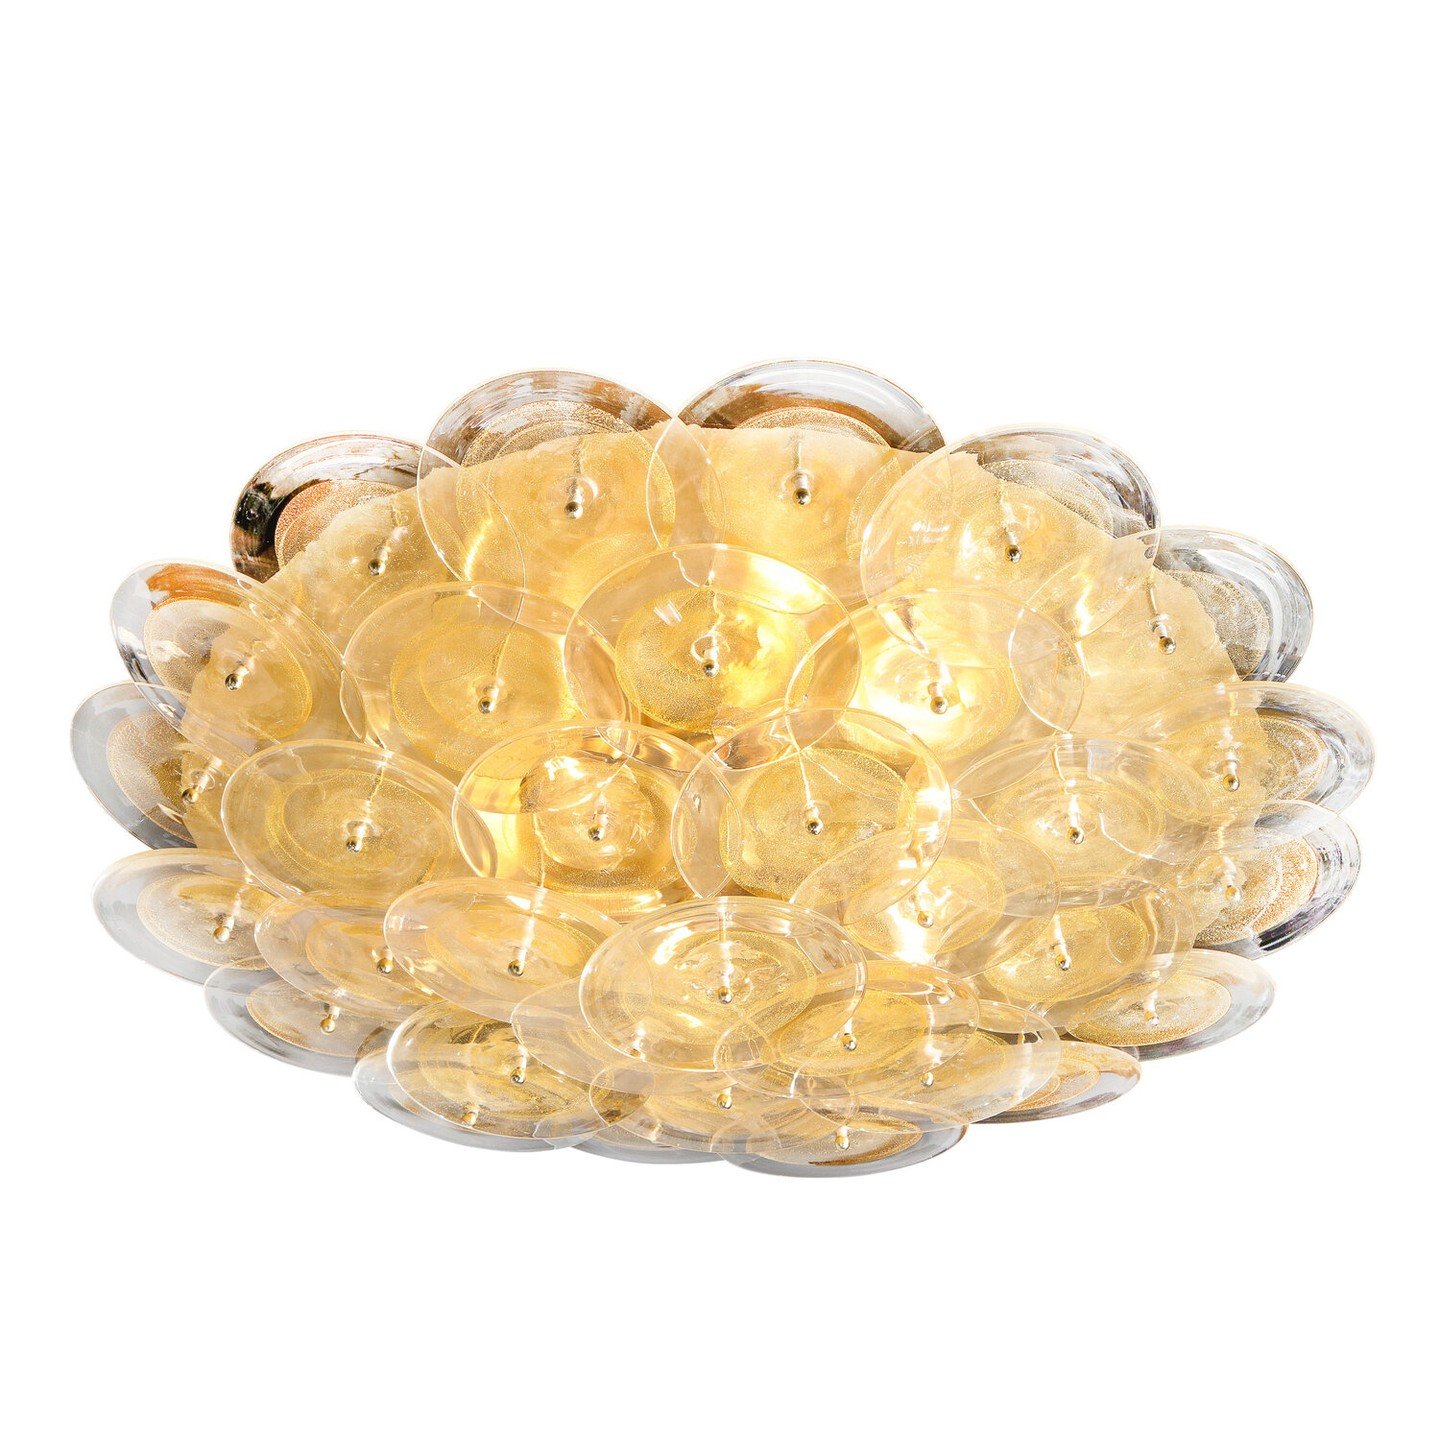 Modernist Brass Flush Mount with Handblown Murano Gold and Translucent Glass Discs

This handblown Murano chandelier is composed of an abundance of overlapping translucent Murano discs with 24kt yellow gold flecks attached to a polished brass base. T